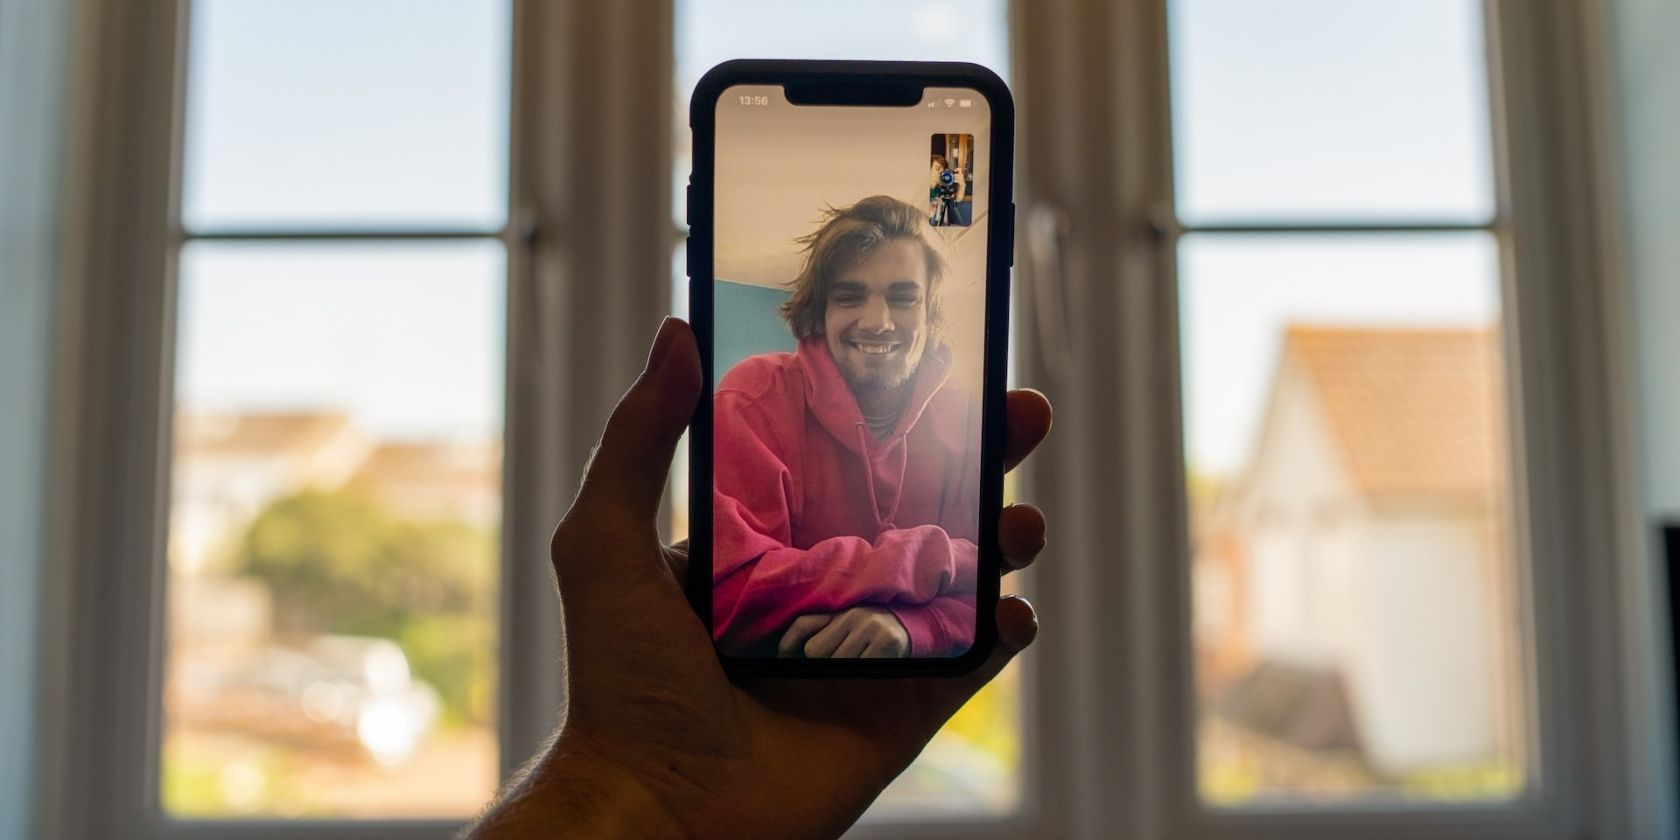 Man in iPhone Facetime video call